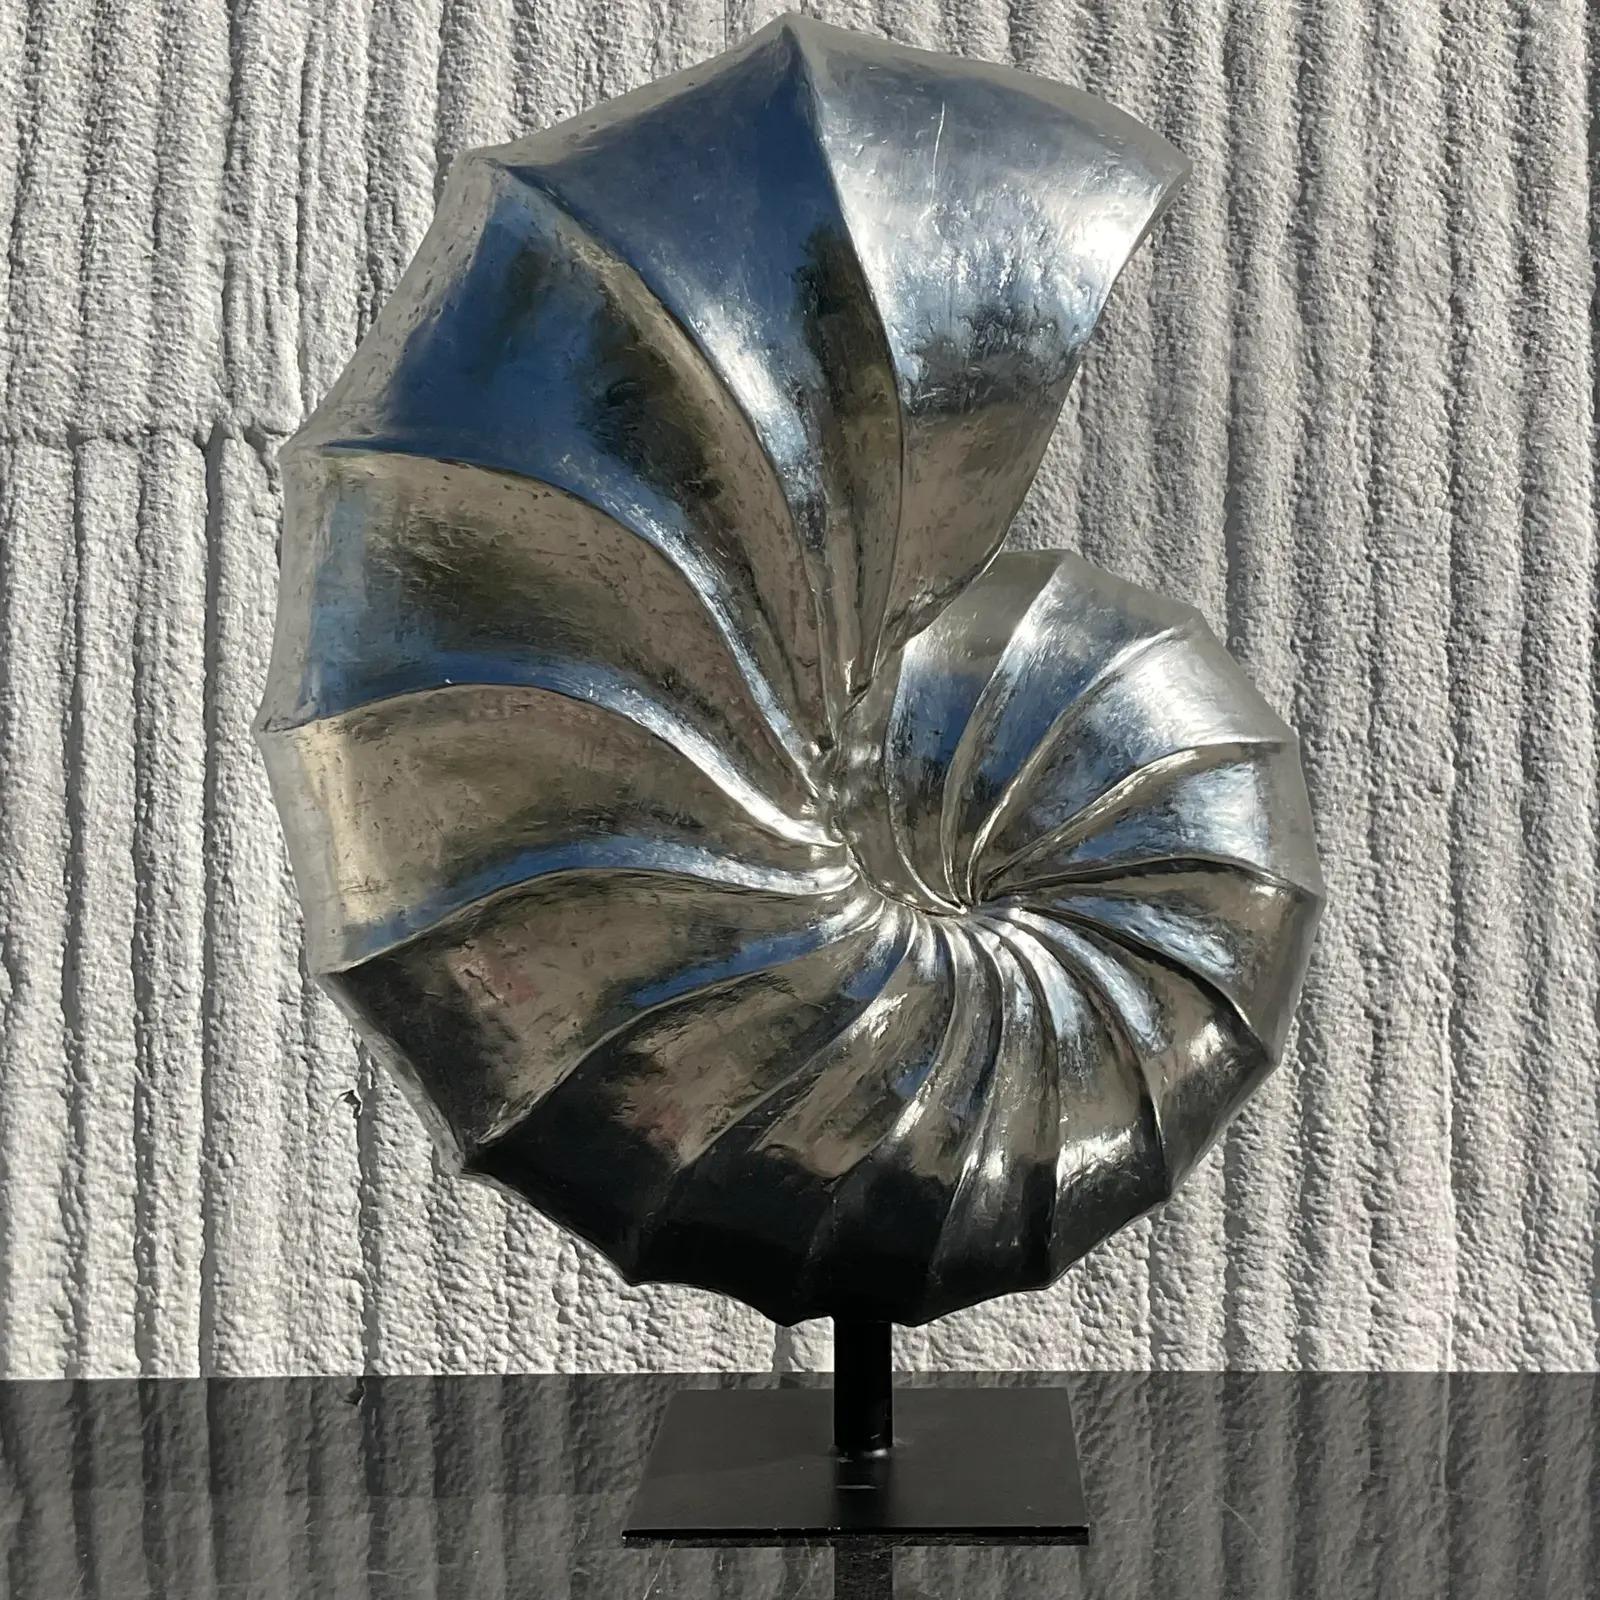 A fabulous vintage Coastal Nautilus shell sculpture. Monumental in size and frame. Beautiful chic design in a silvered resin. Rests on a metal plinth. Acquired from a Palm Beach estate.